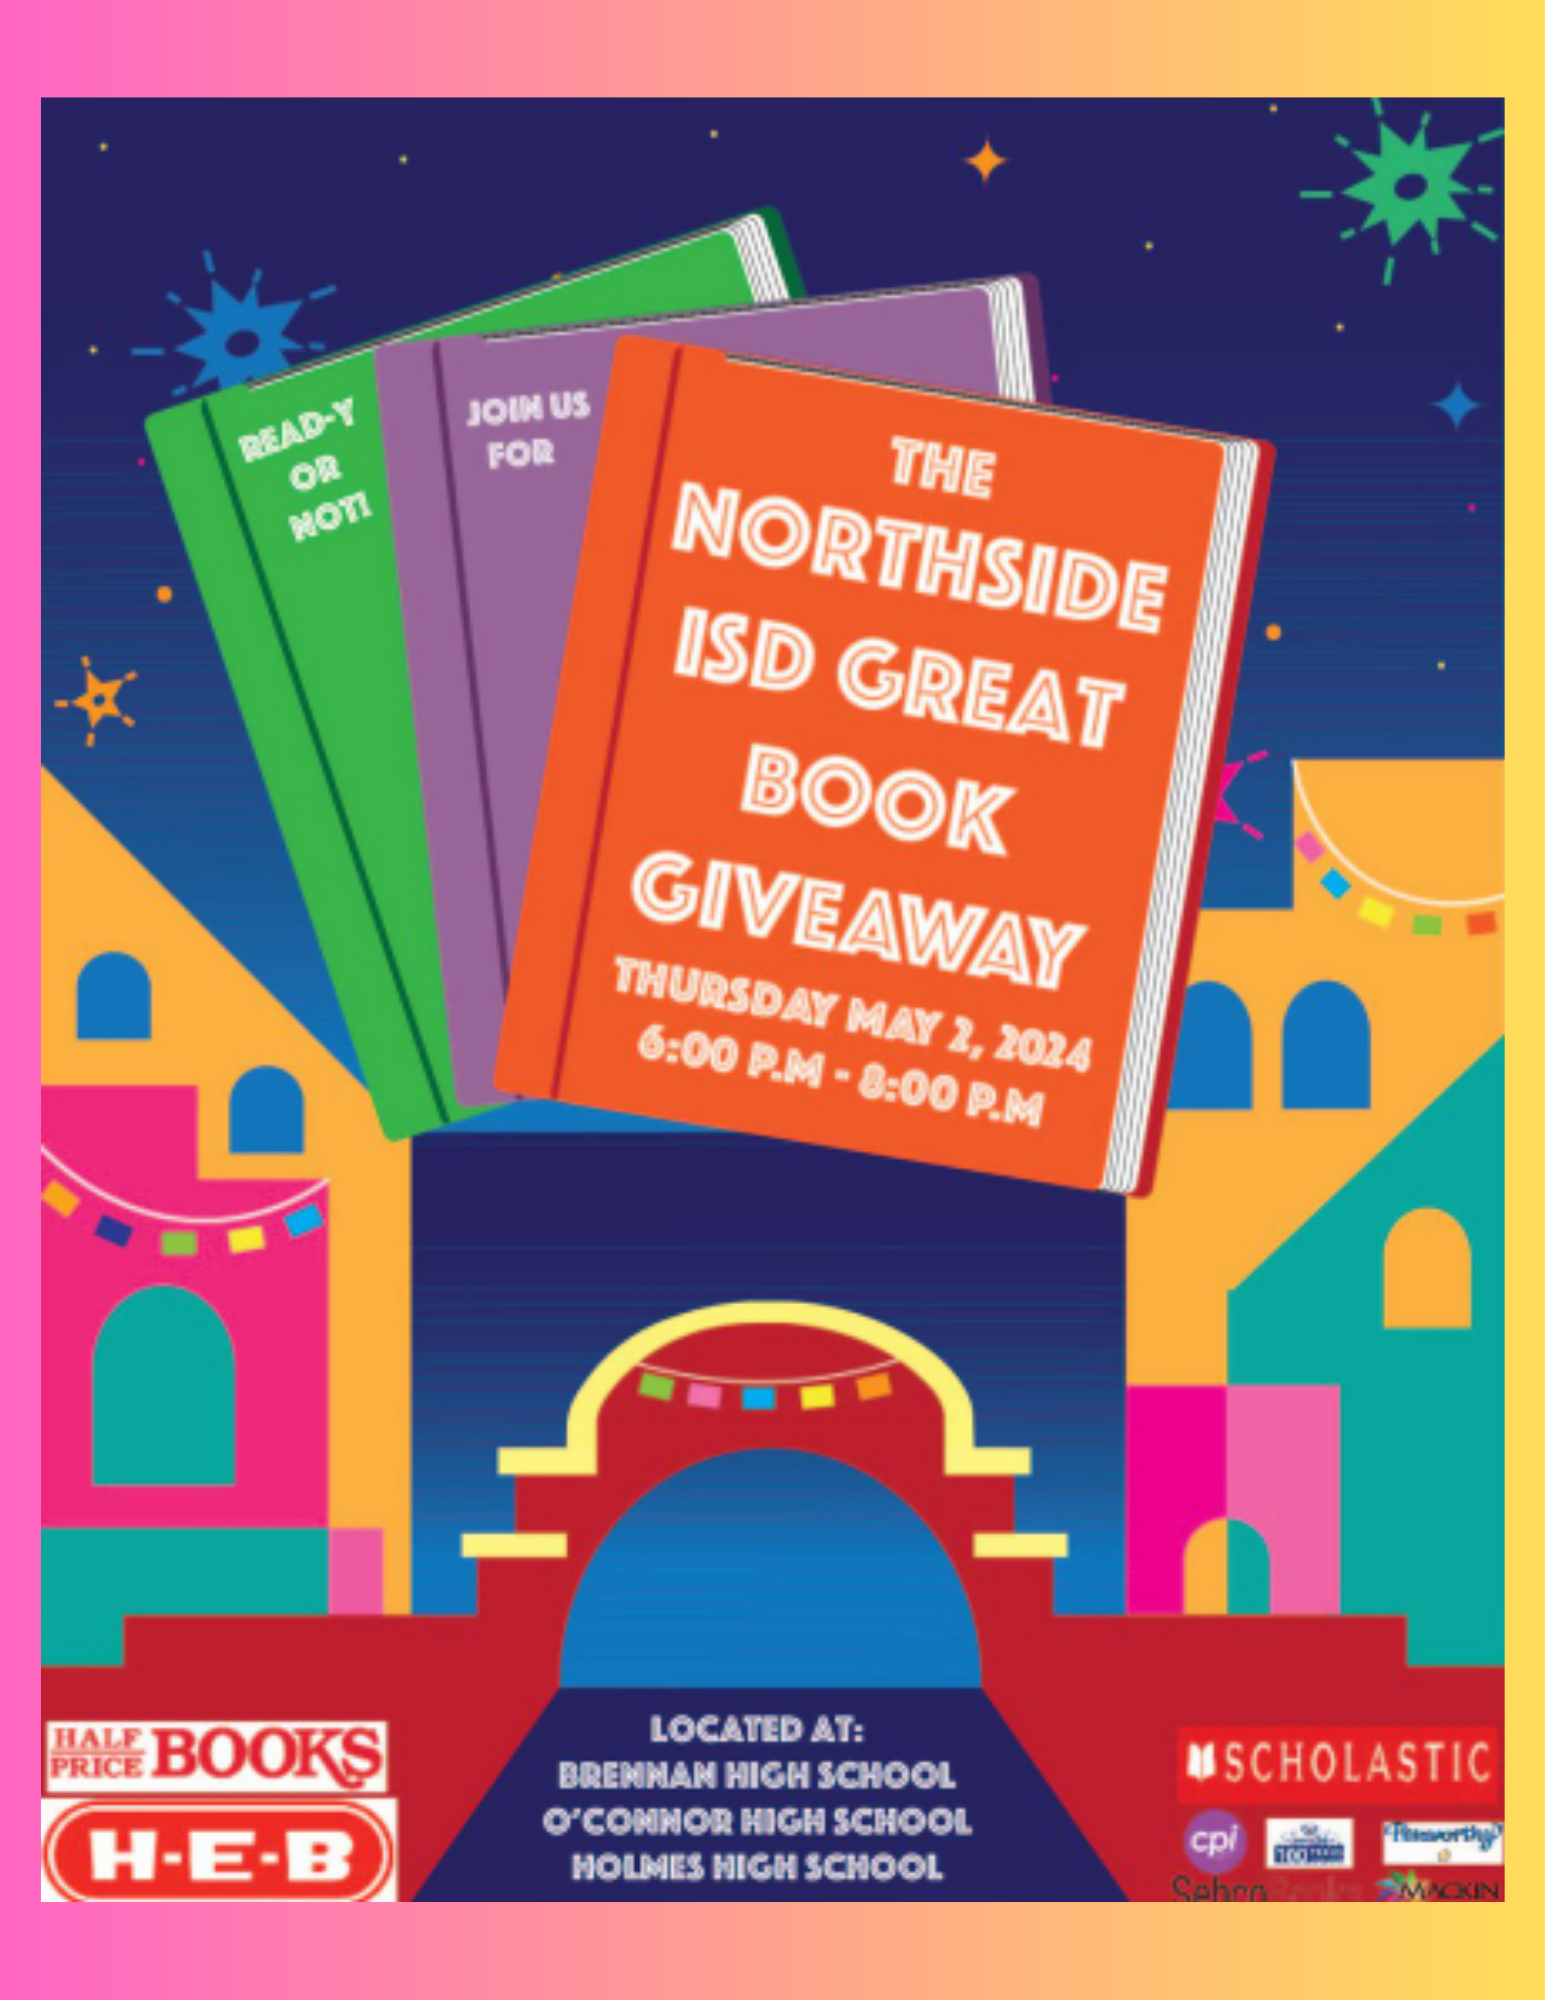 Great Book Giveaway